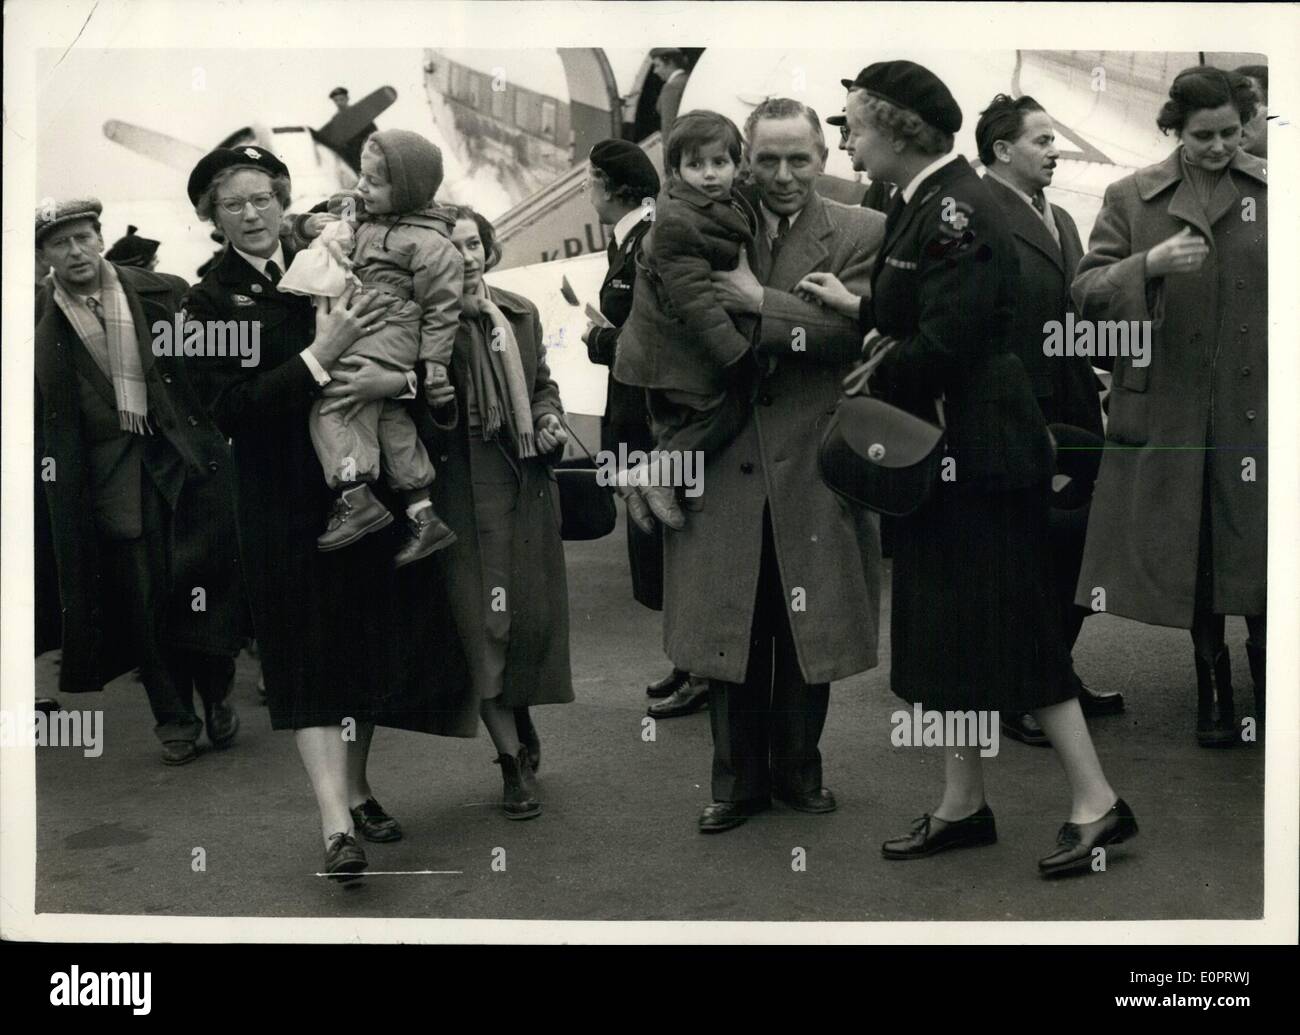 Nov. 11, 1956 - Hungarian refugees arrive in England. escorted by social workers. A party of 61 Hungarian refugees arrived at Blackbushe airport this morning. They are the advance guard of the 2,500 that this country is taking. photo shows Refuges including children are escorted by social workers on arrival at Blackbushe this afternoon. Stock Photo